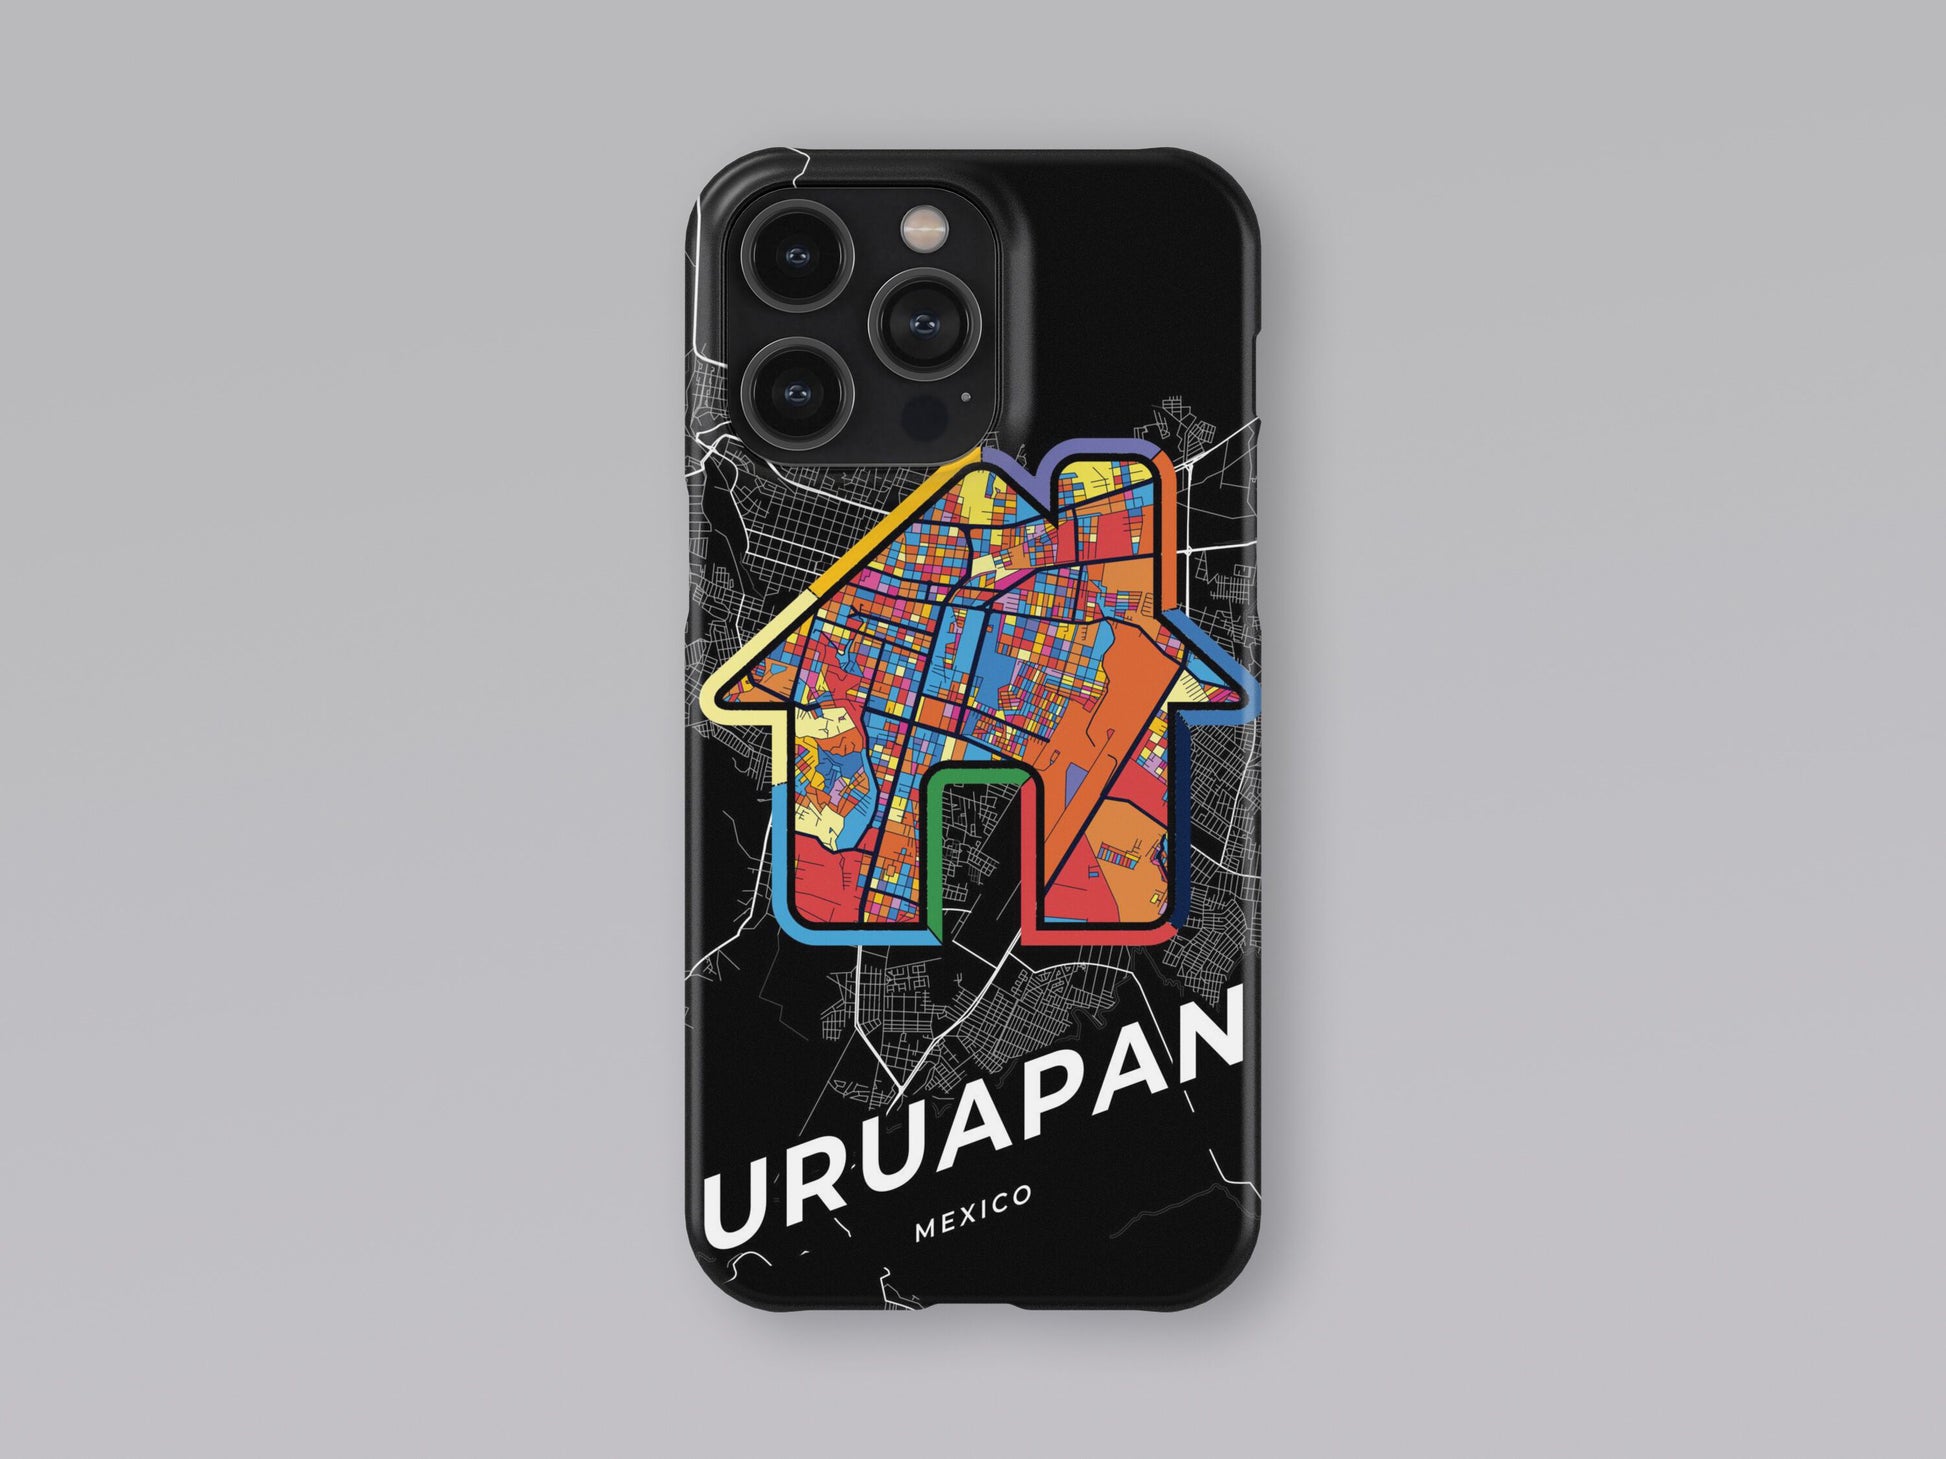 Uruapan Mexico slim phone case with colorful icon 3